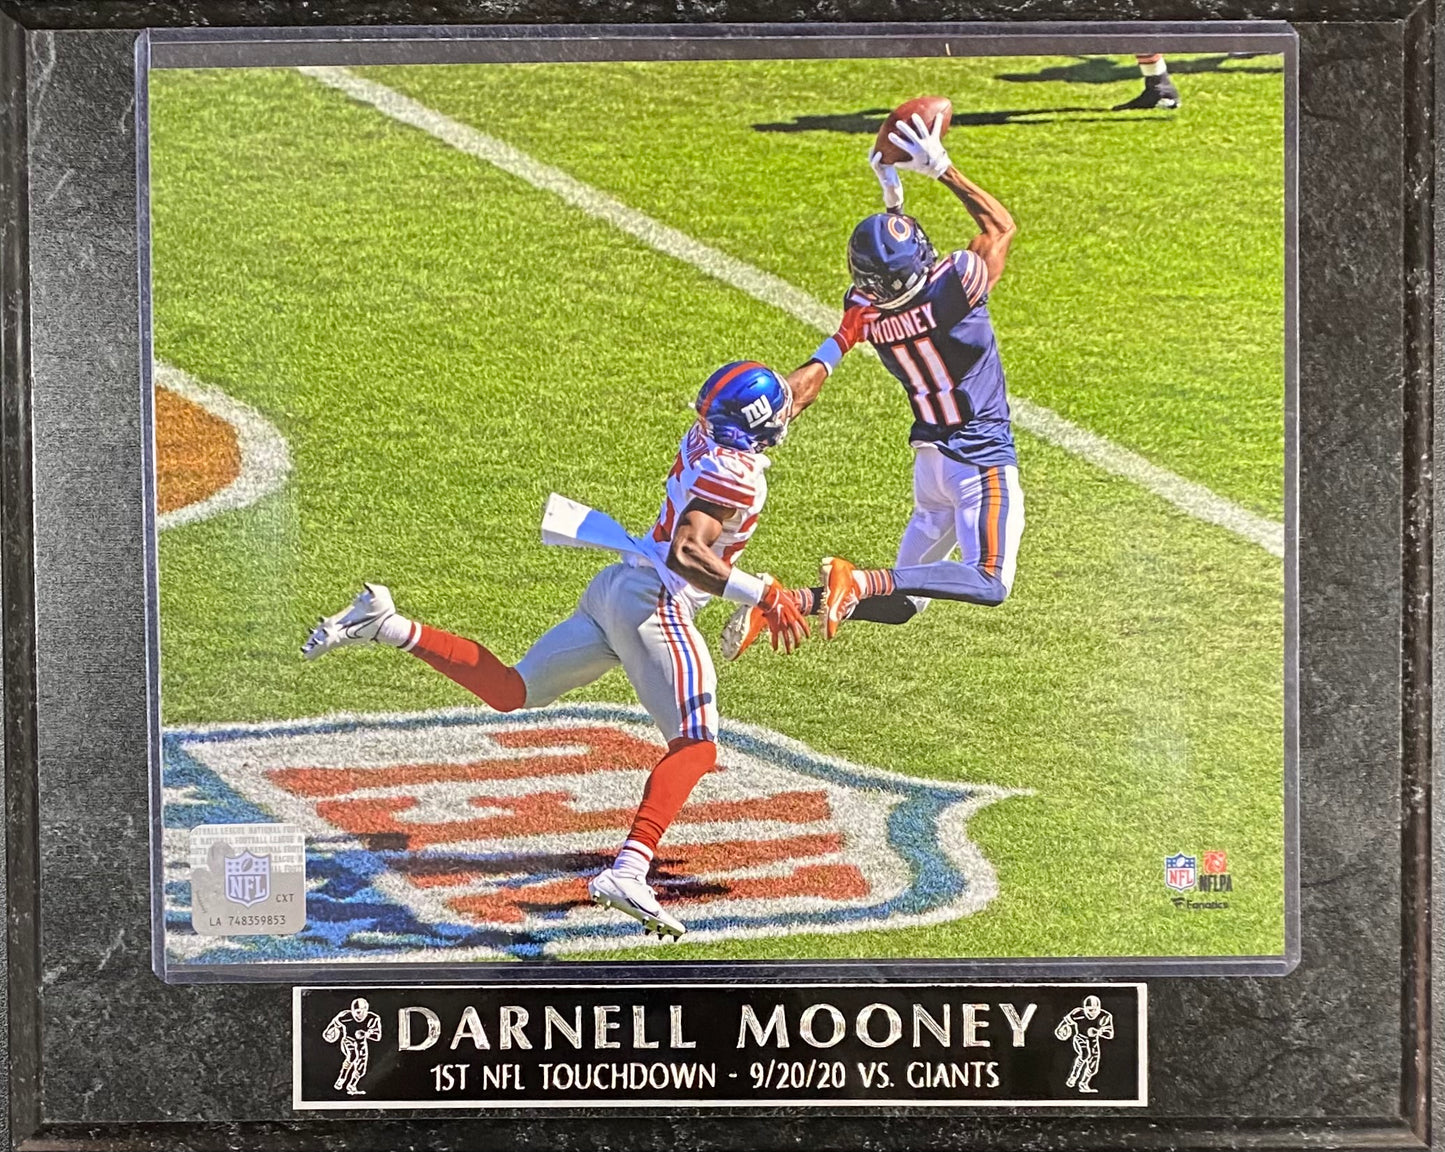 Darnell Mooney Chicago Bears 1st NFL Touchdown - 9/20/20 vs Giants Wall Plaque